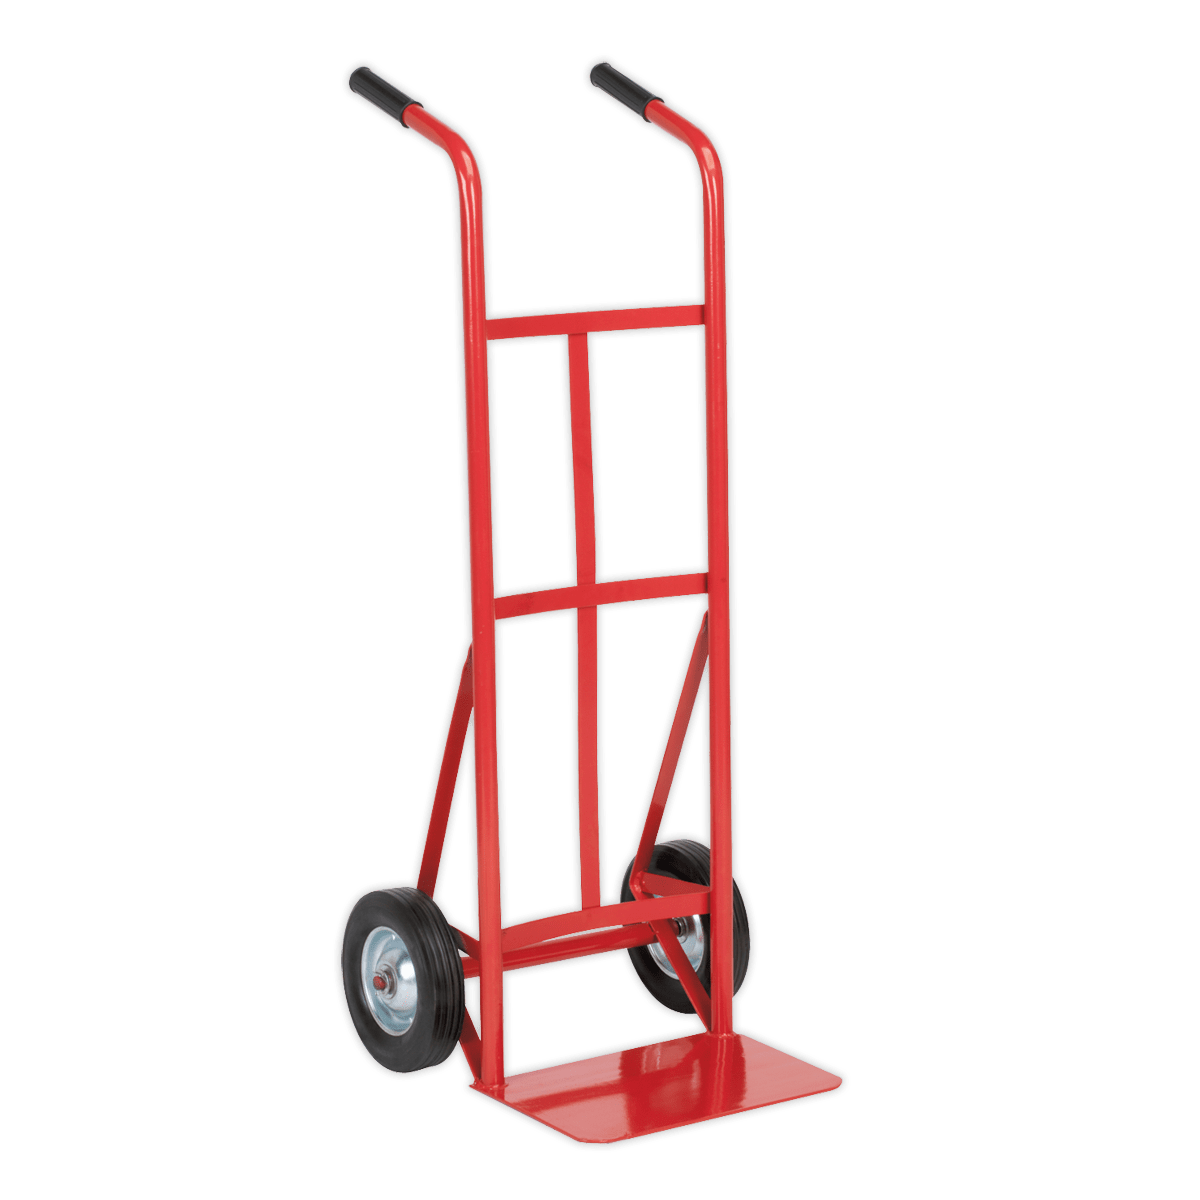 Sealey Sack Truck with Solid Tyres 150kg Capacity CST983 | Strong tubular steel construction with welded joints. | toolforce.ie